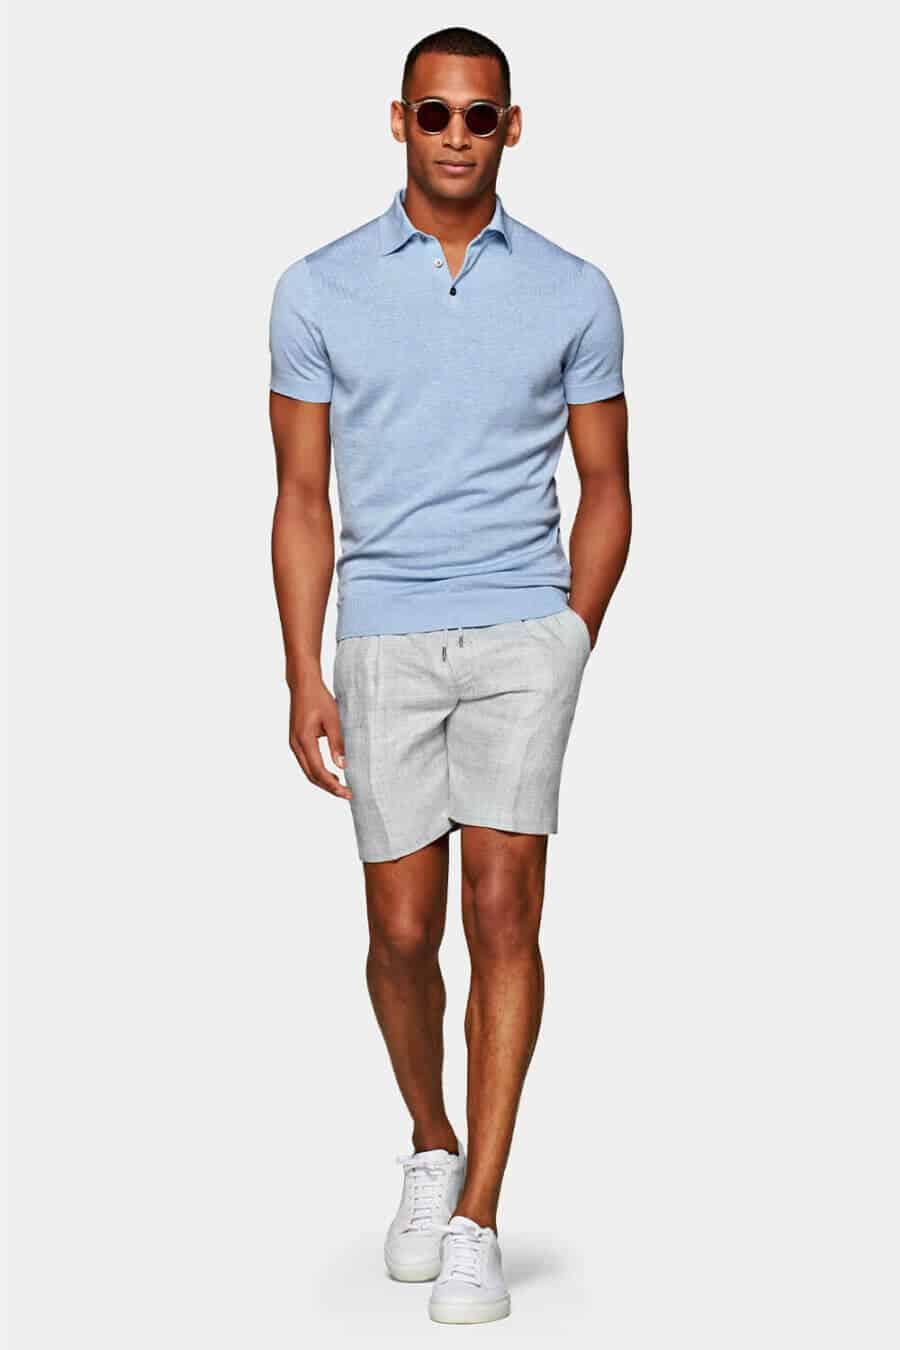 Men's smart polo shirt, tailored shorts and white sneakers summer outfit